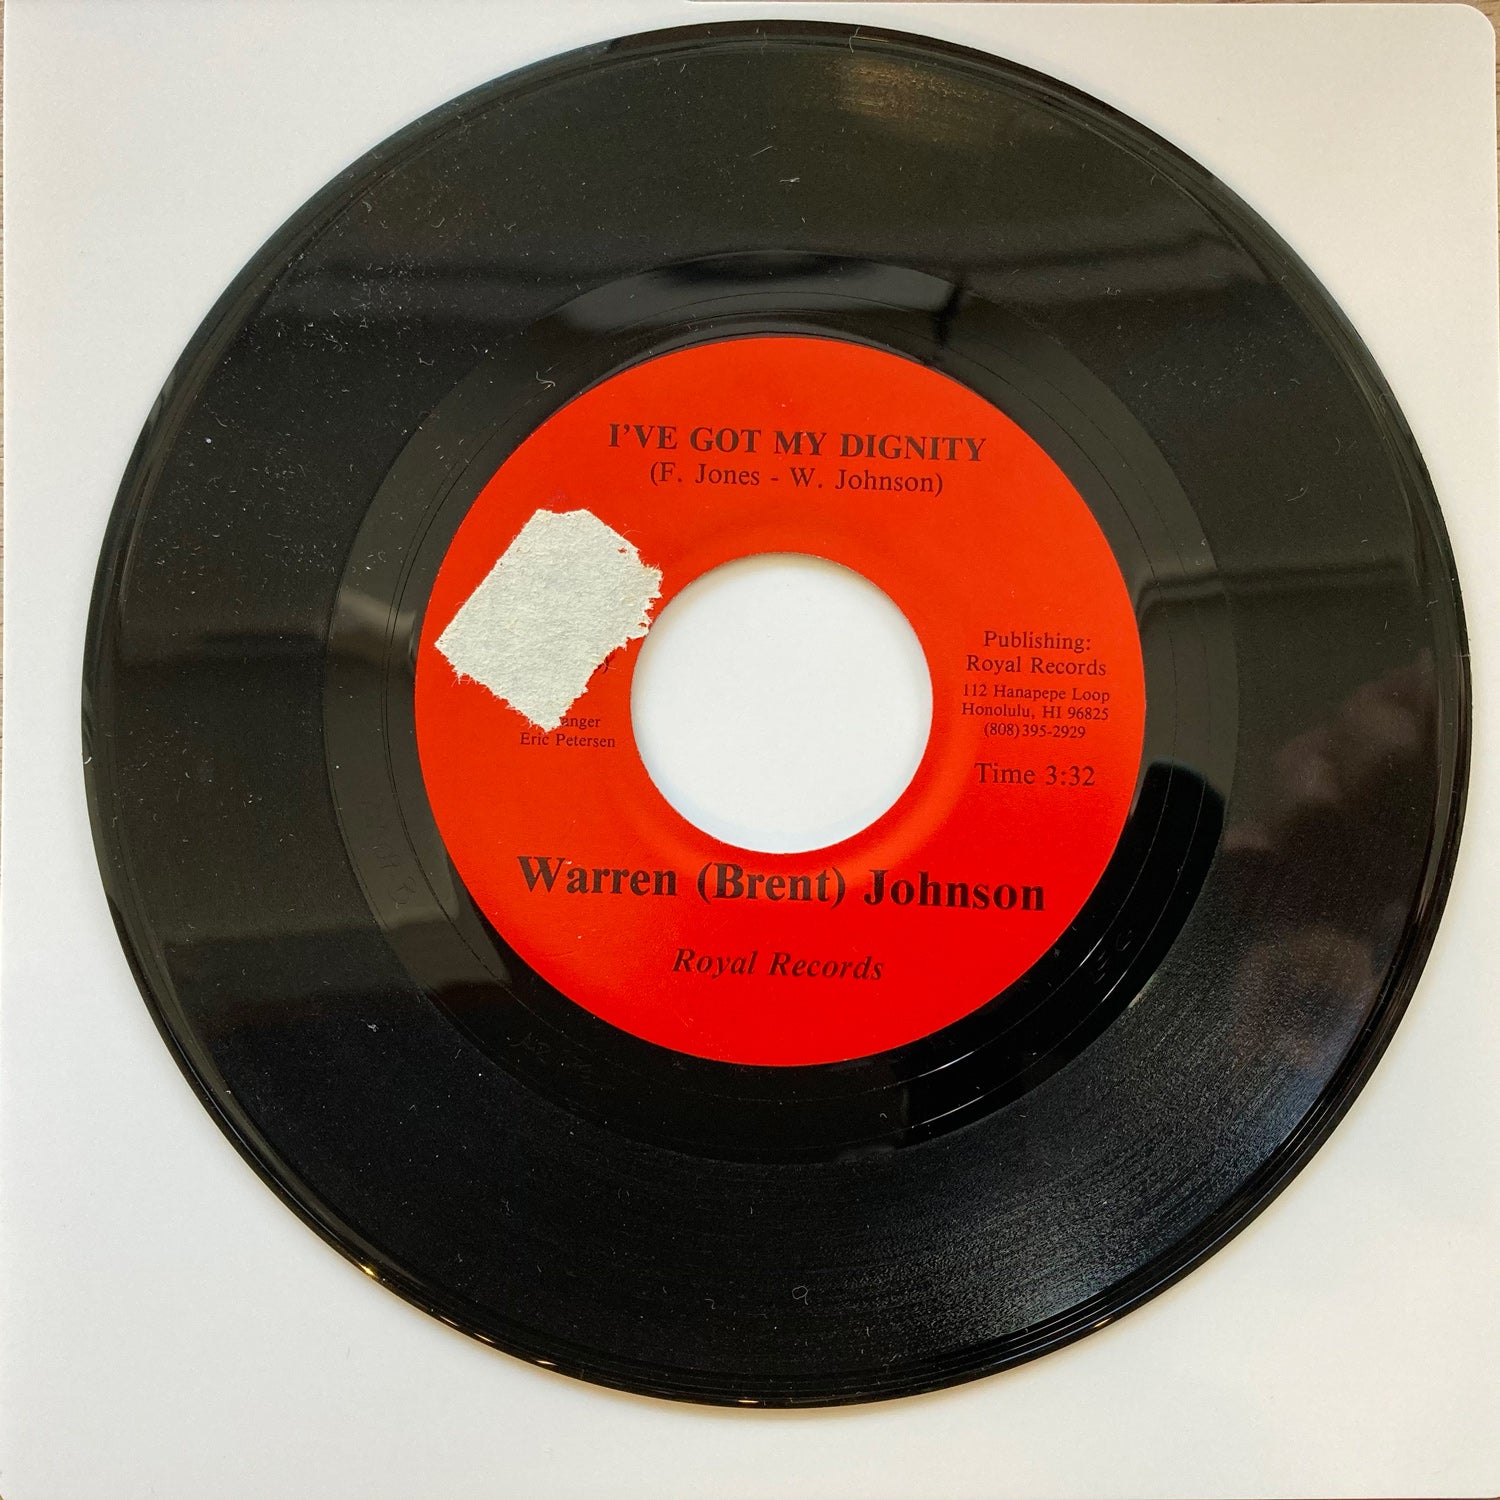 Warren (Brent) Johnson - Stay With Me / I've Got My Dignity (7")